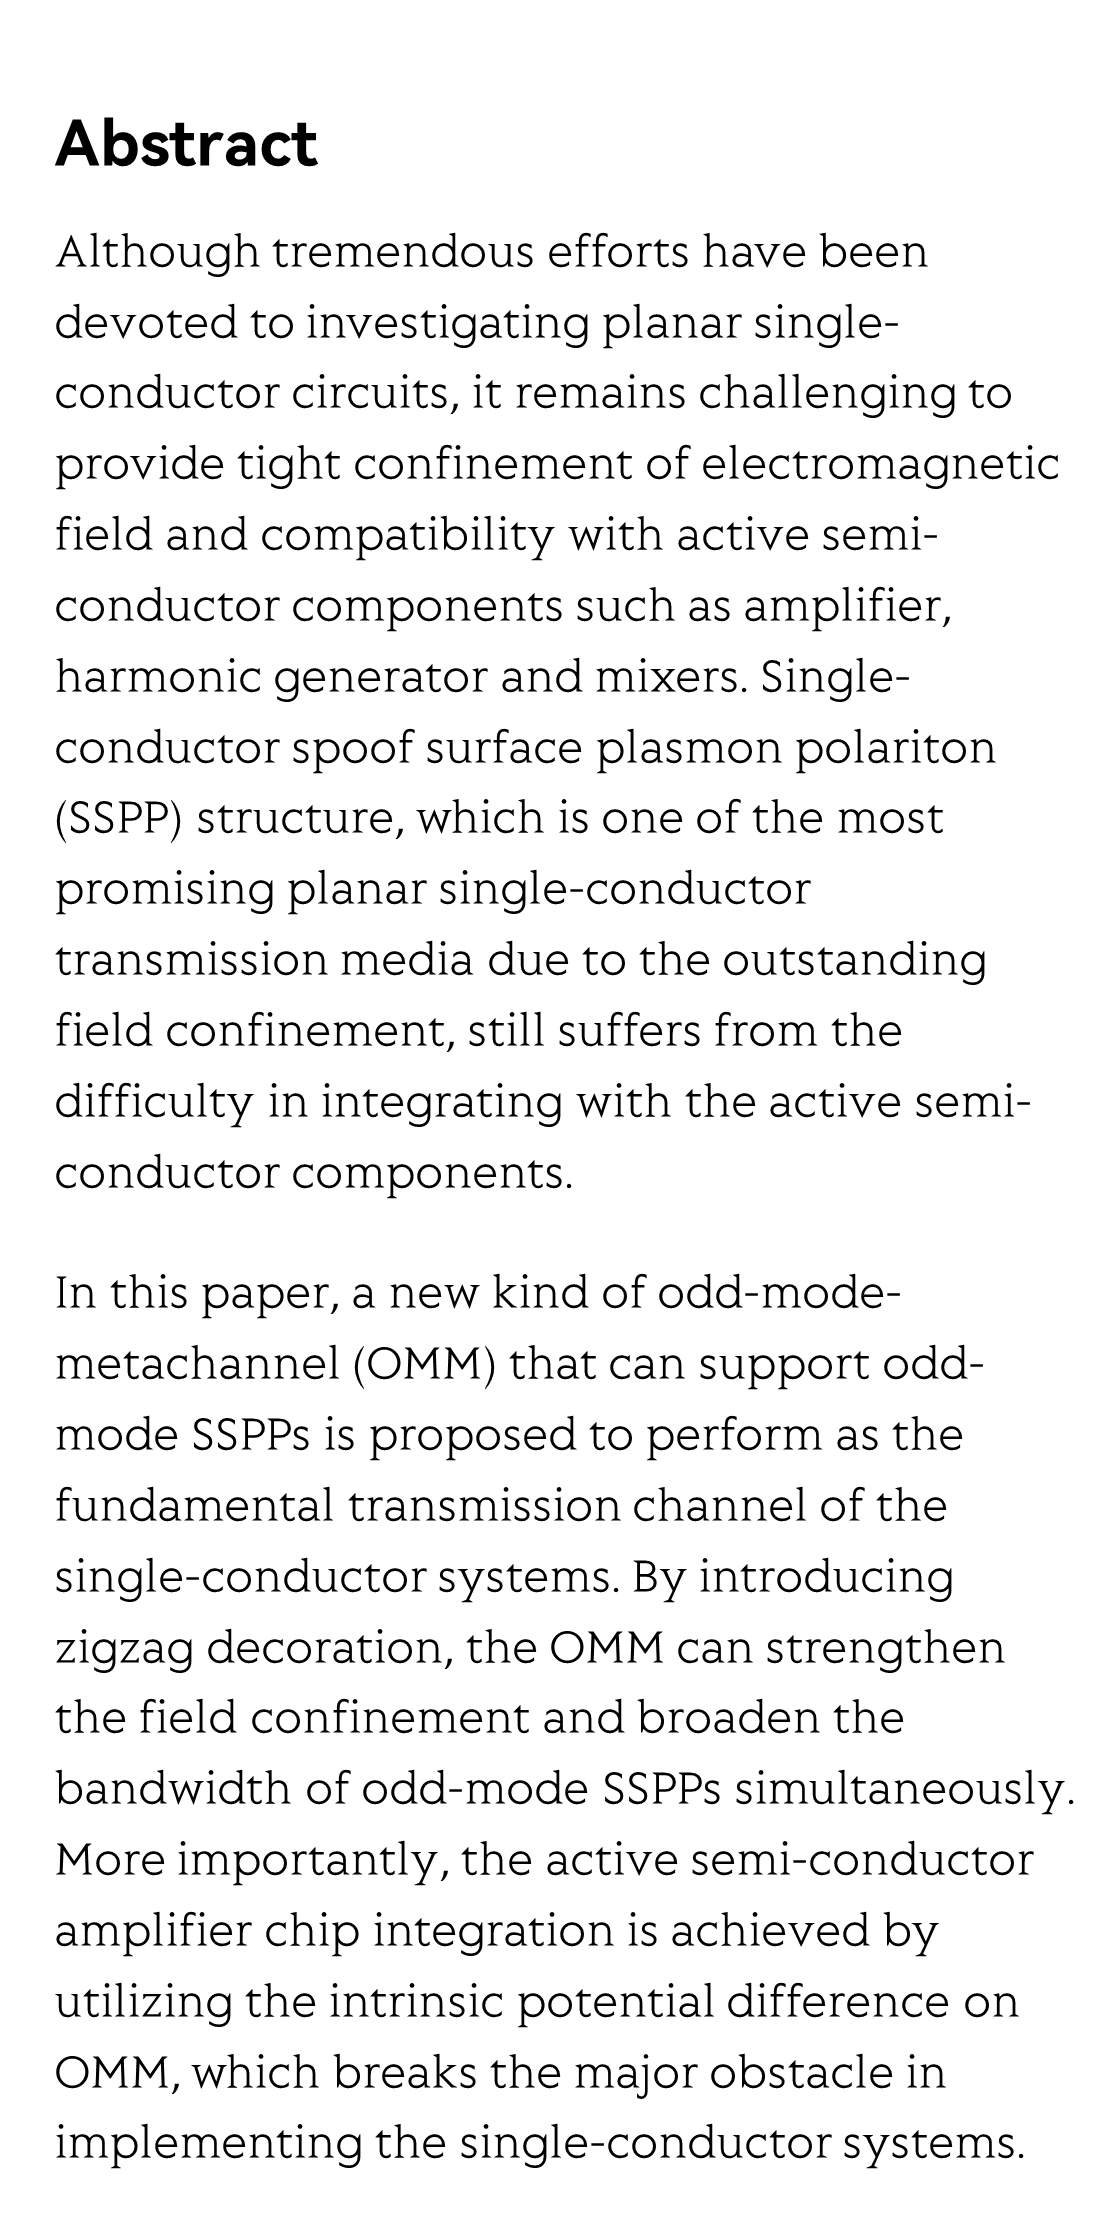 Active odd-mode-metachannel for single-conductor systems_2